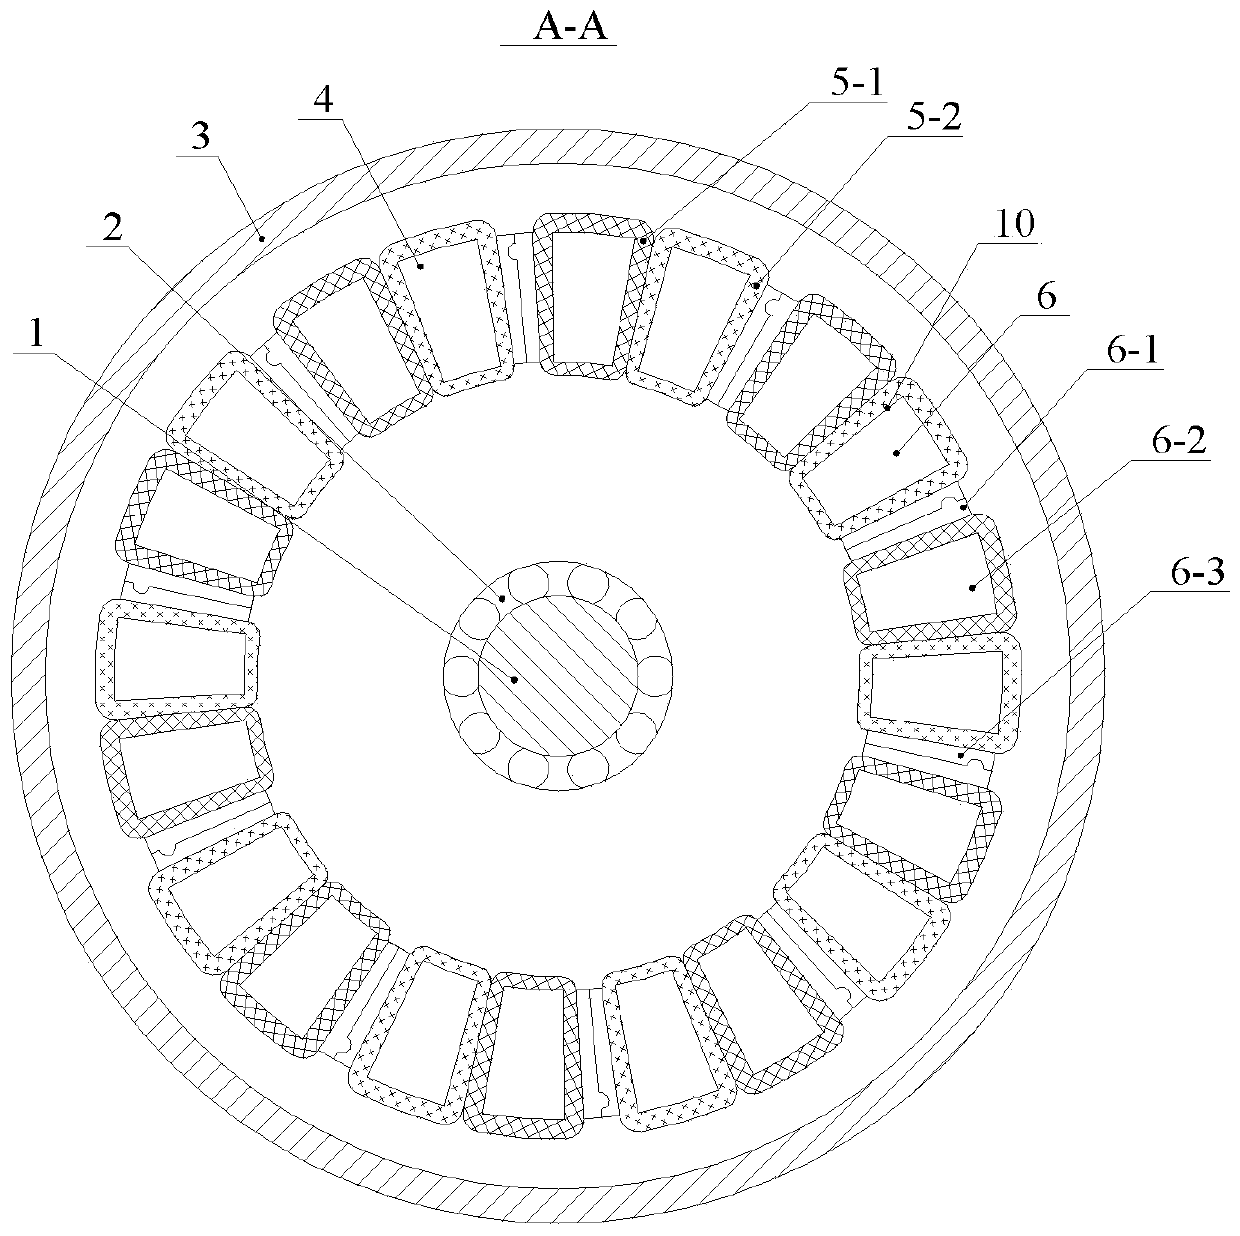 Modular disc multi-phase permanent magnet synchronous motor based on single-layer and double-layer hybrid winding